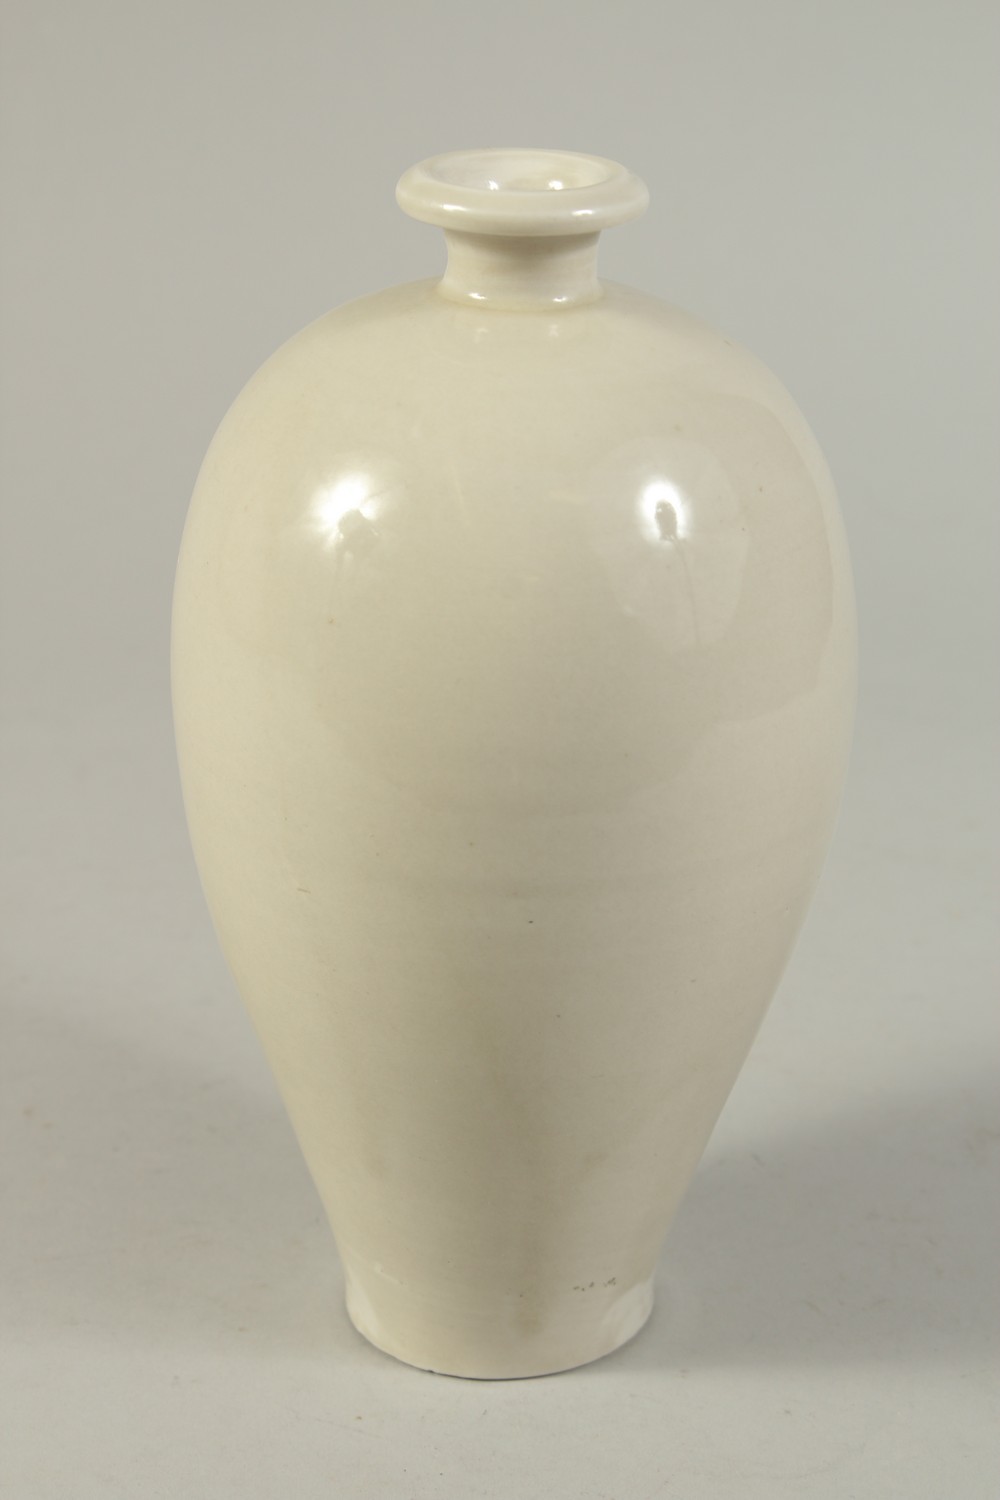 A CHINESE WHITE GLAZED DING WARE MEIPING VASE. 20.5cms high. - Image 2 of 5